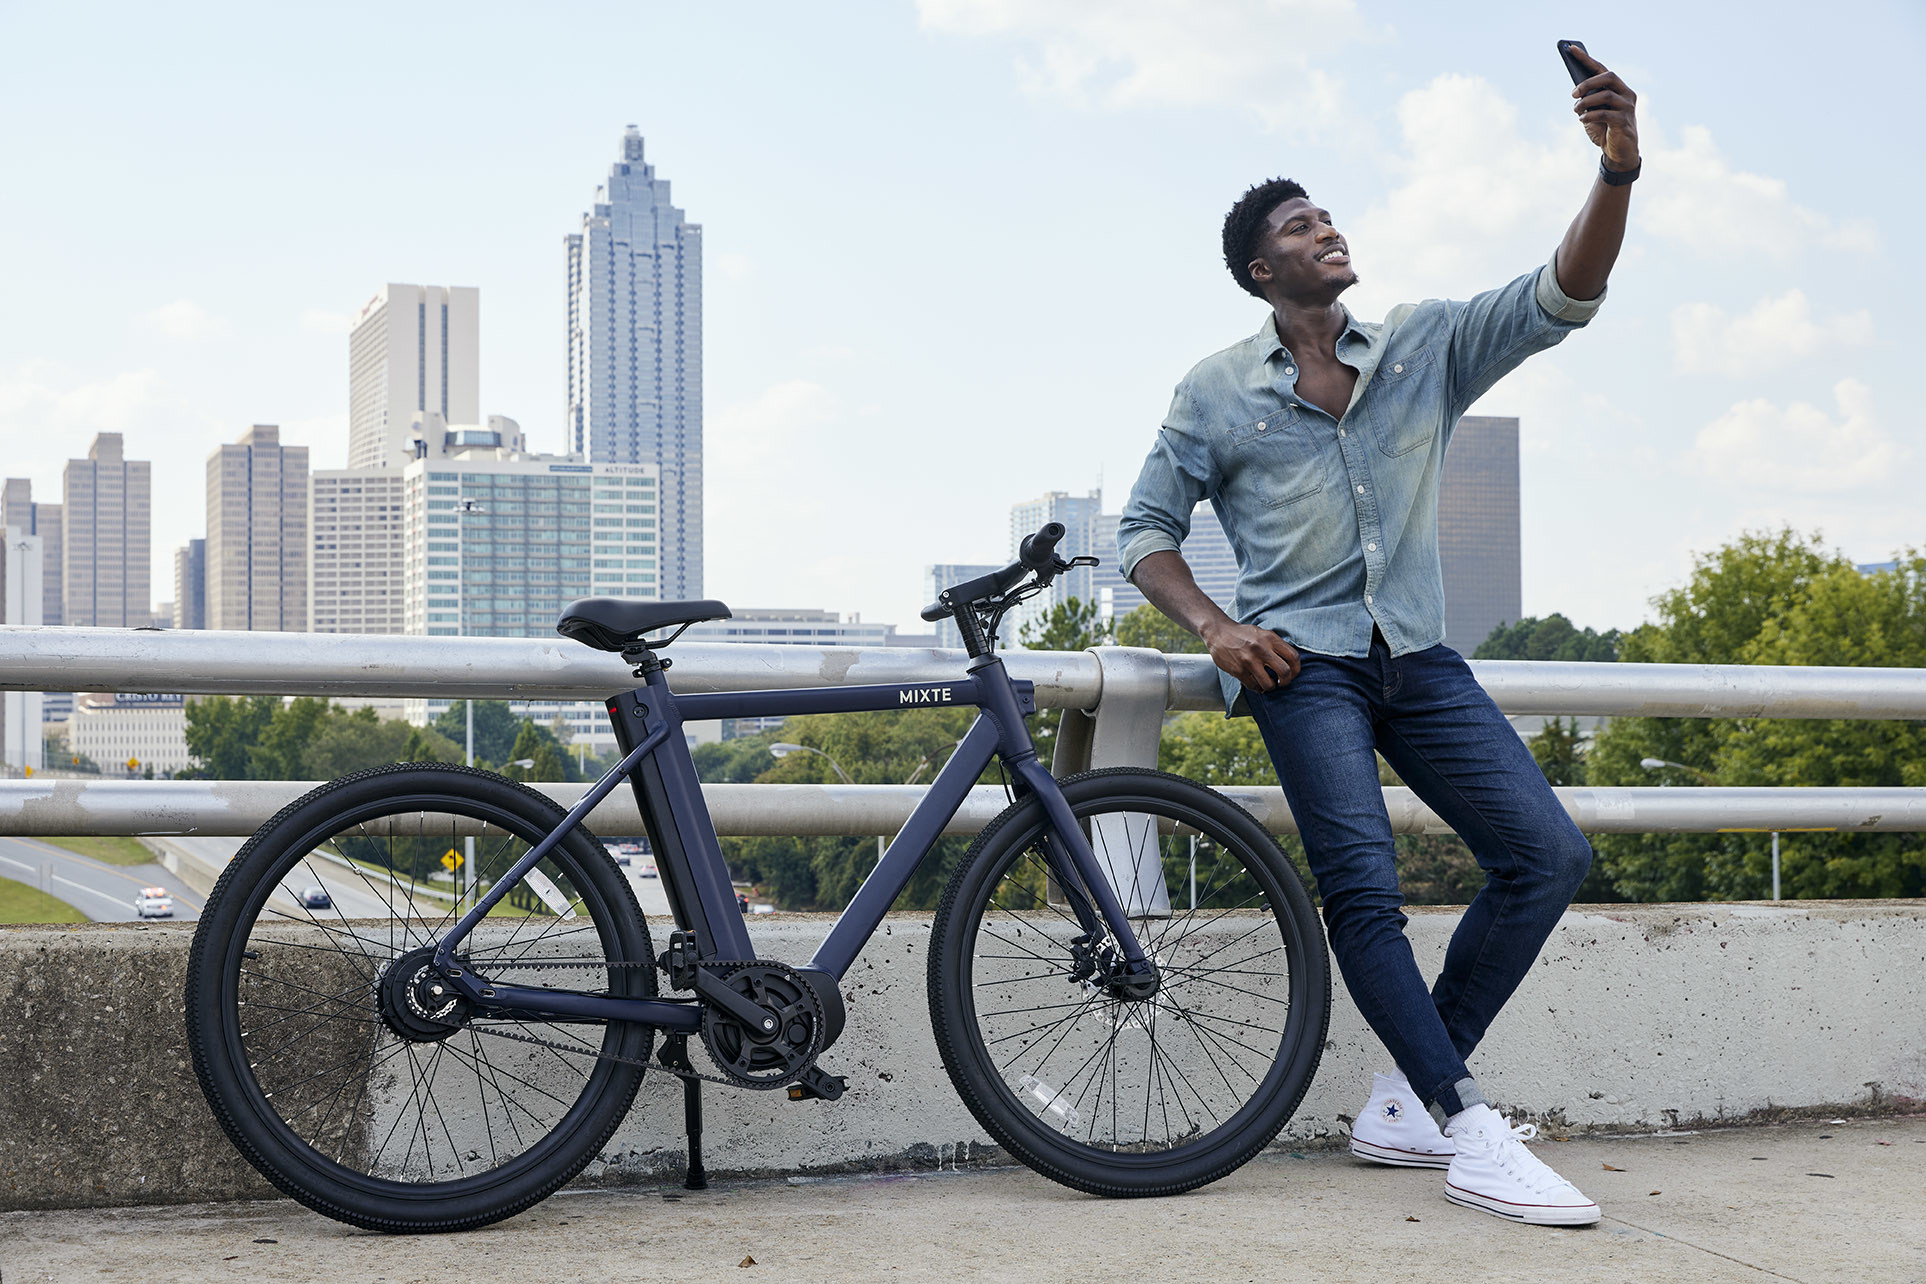 MIXTE Direct-To-Consumer Light Electric Vehicle Company Launches In The US